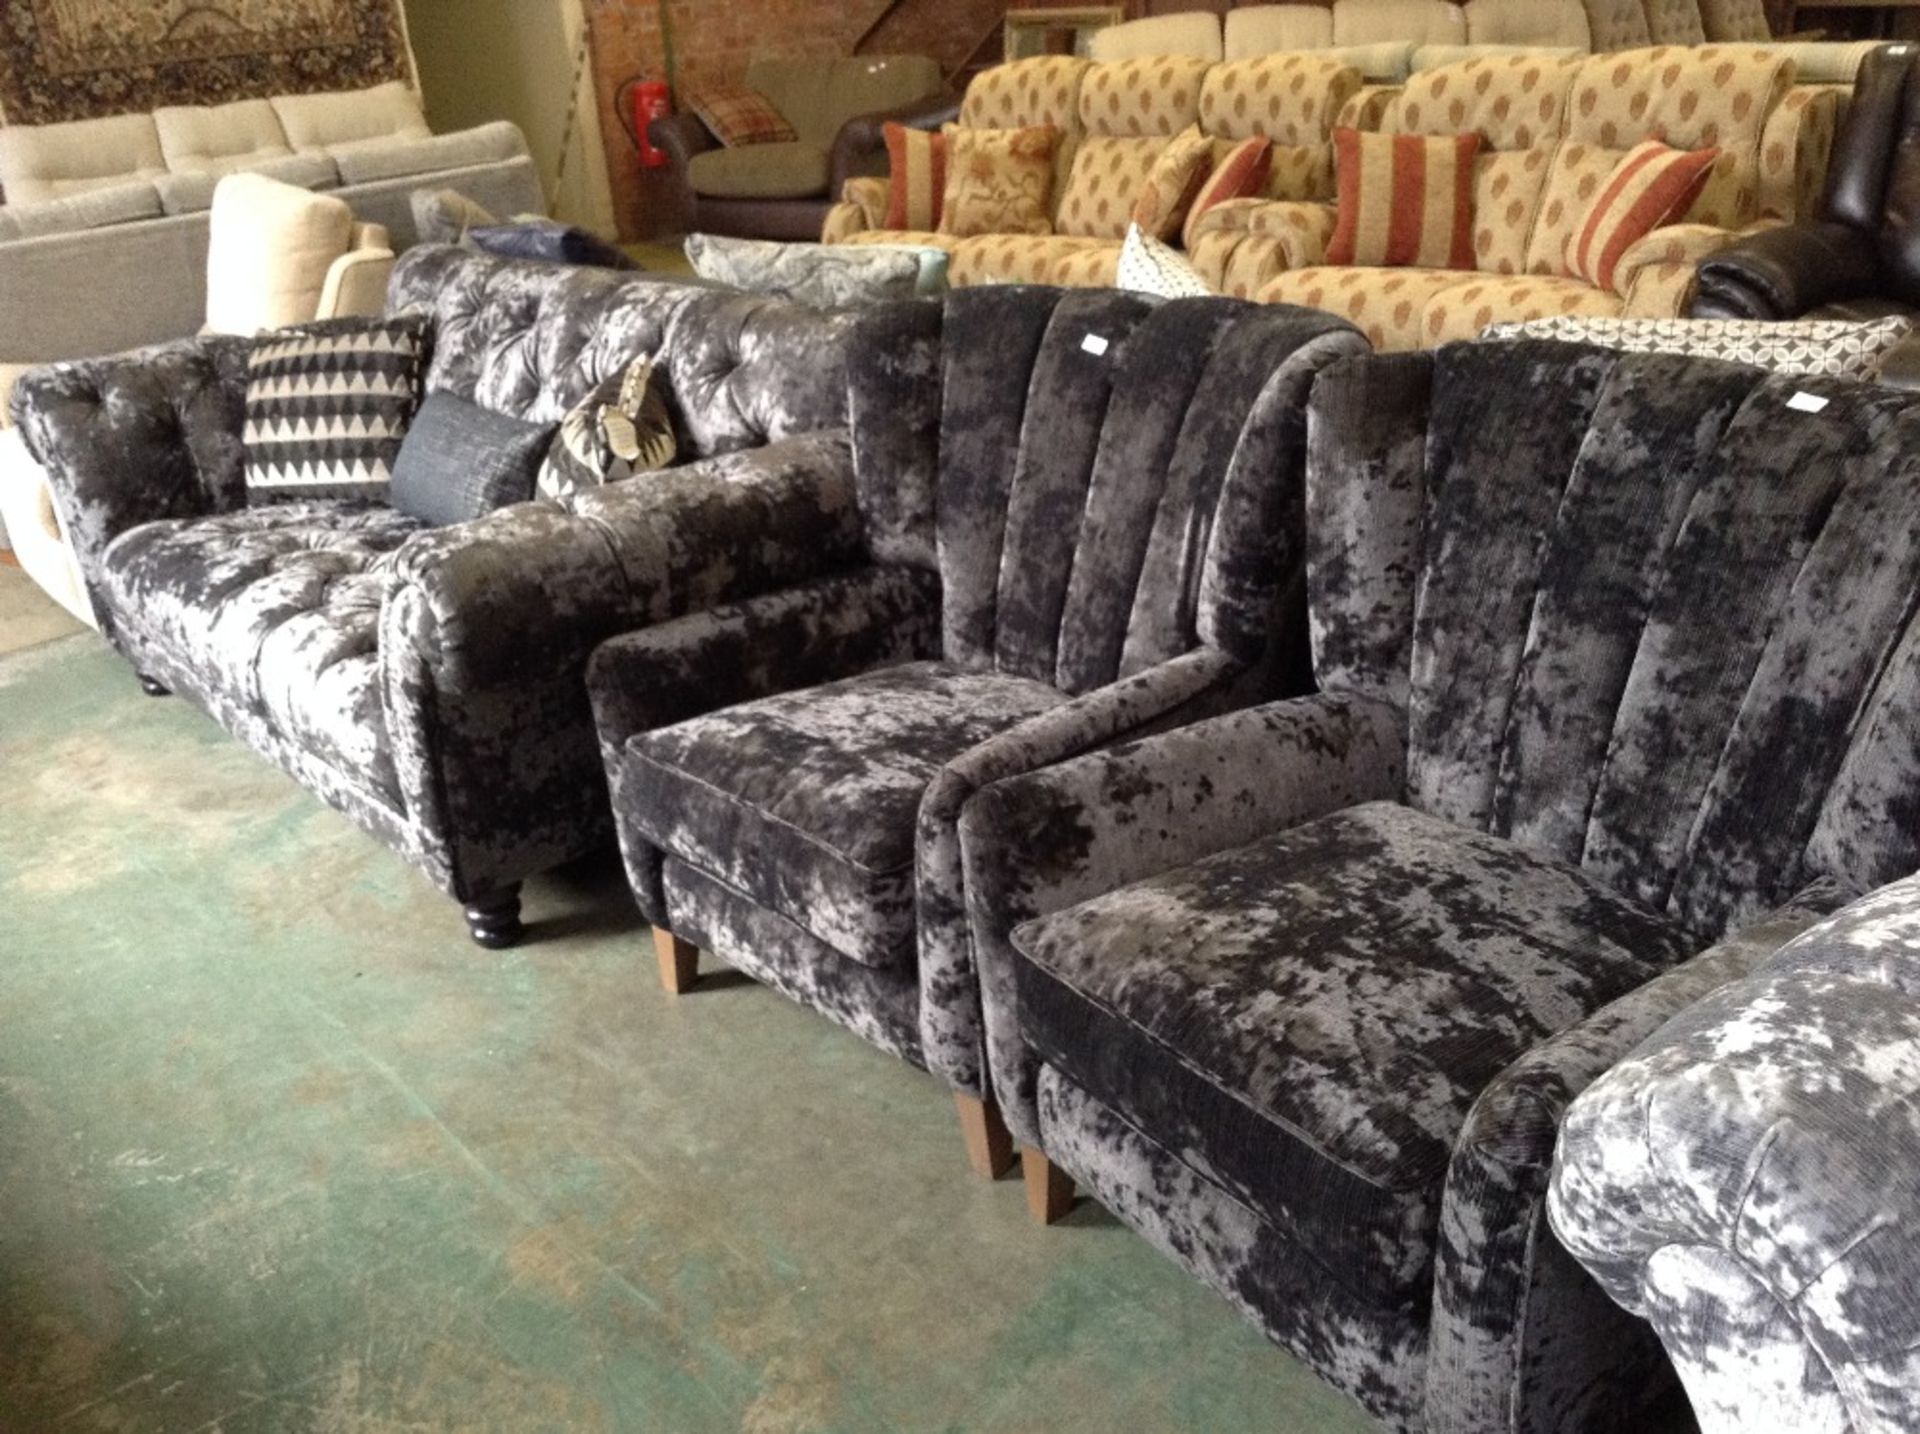 UTOPIA GREY CHENILLE BUTTON BACK 2 SEATER SOFA AND 2 CHAIRS (feet do not match) (4473 4469)